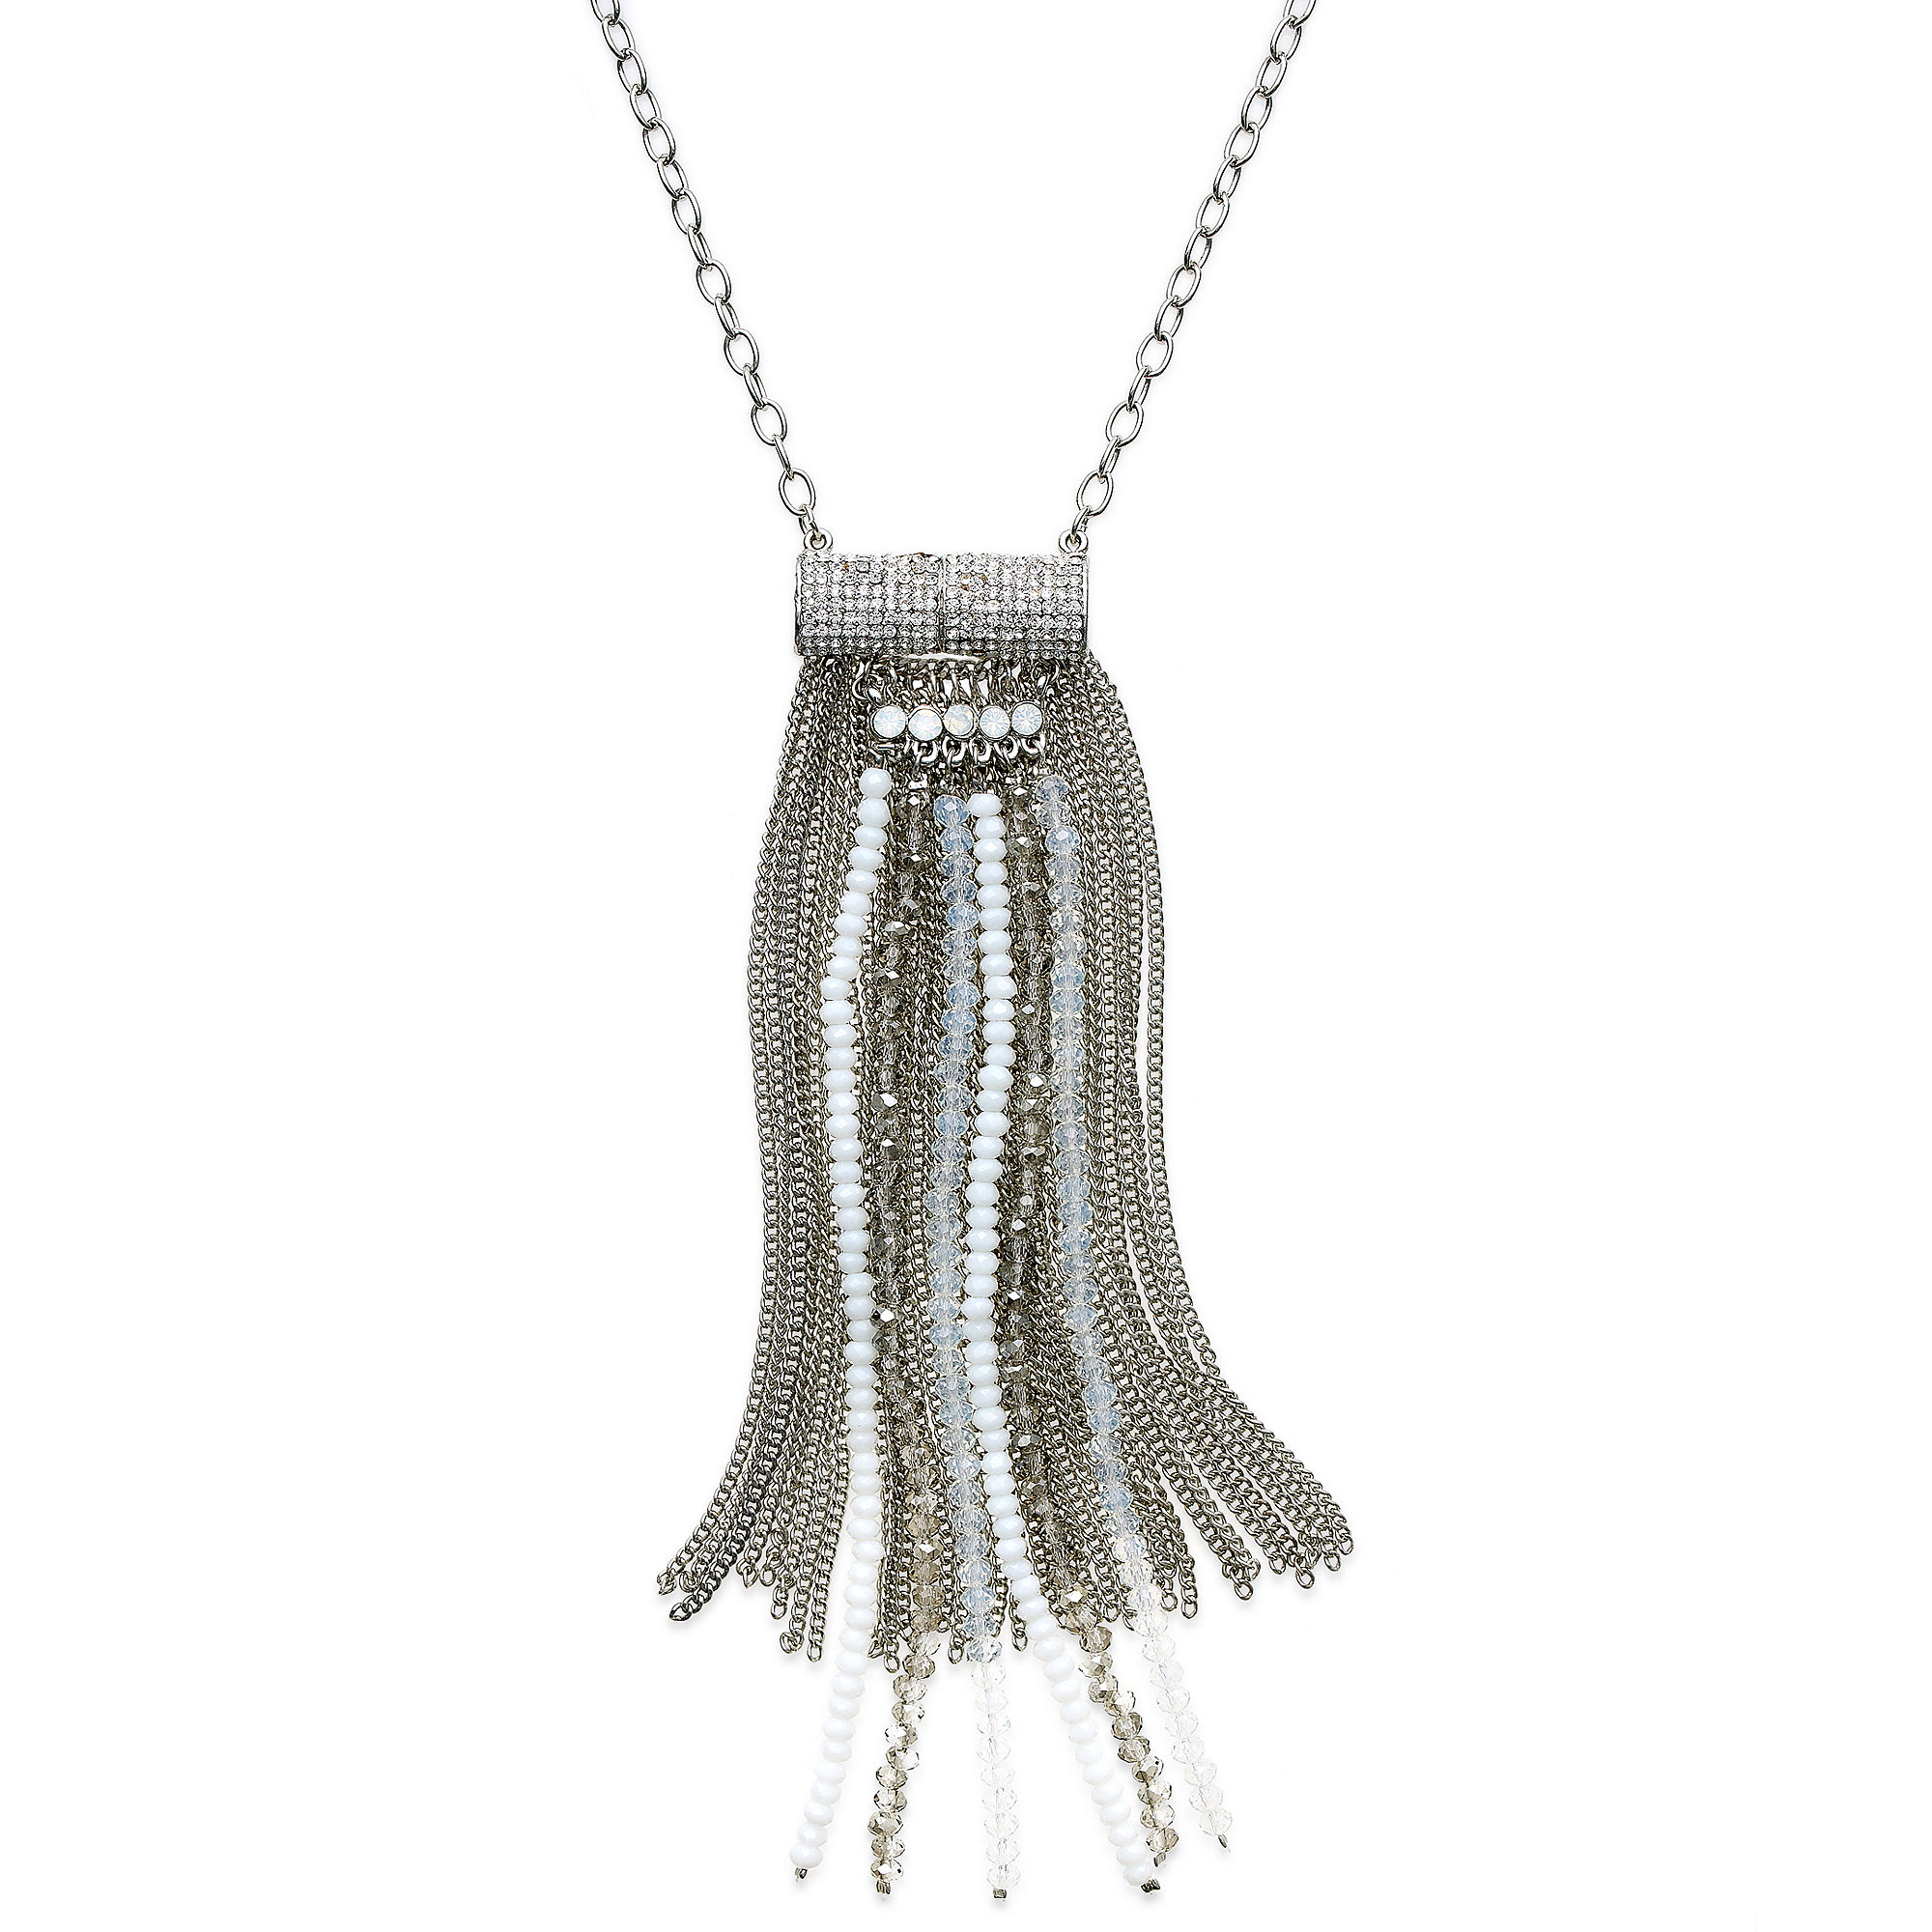 Lyst - Inc International Concepts Silvertone White Bead Crystal Chain ...